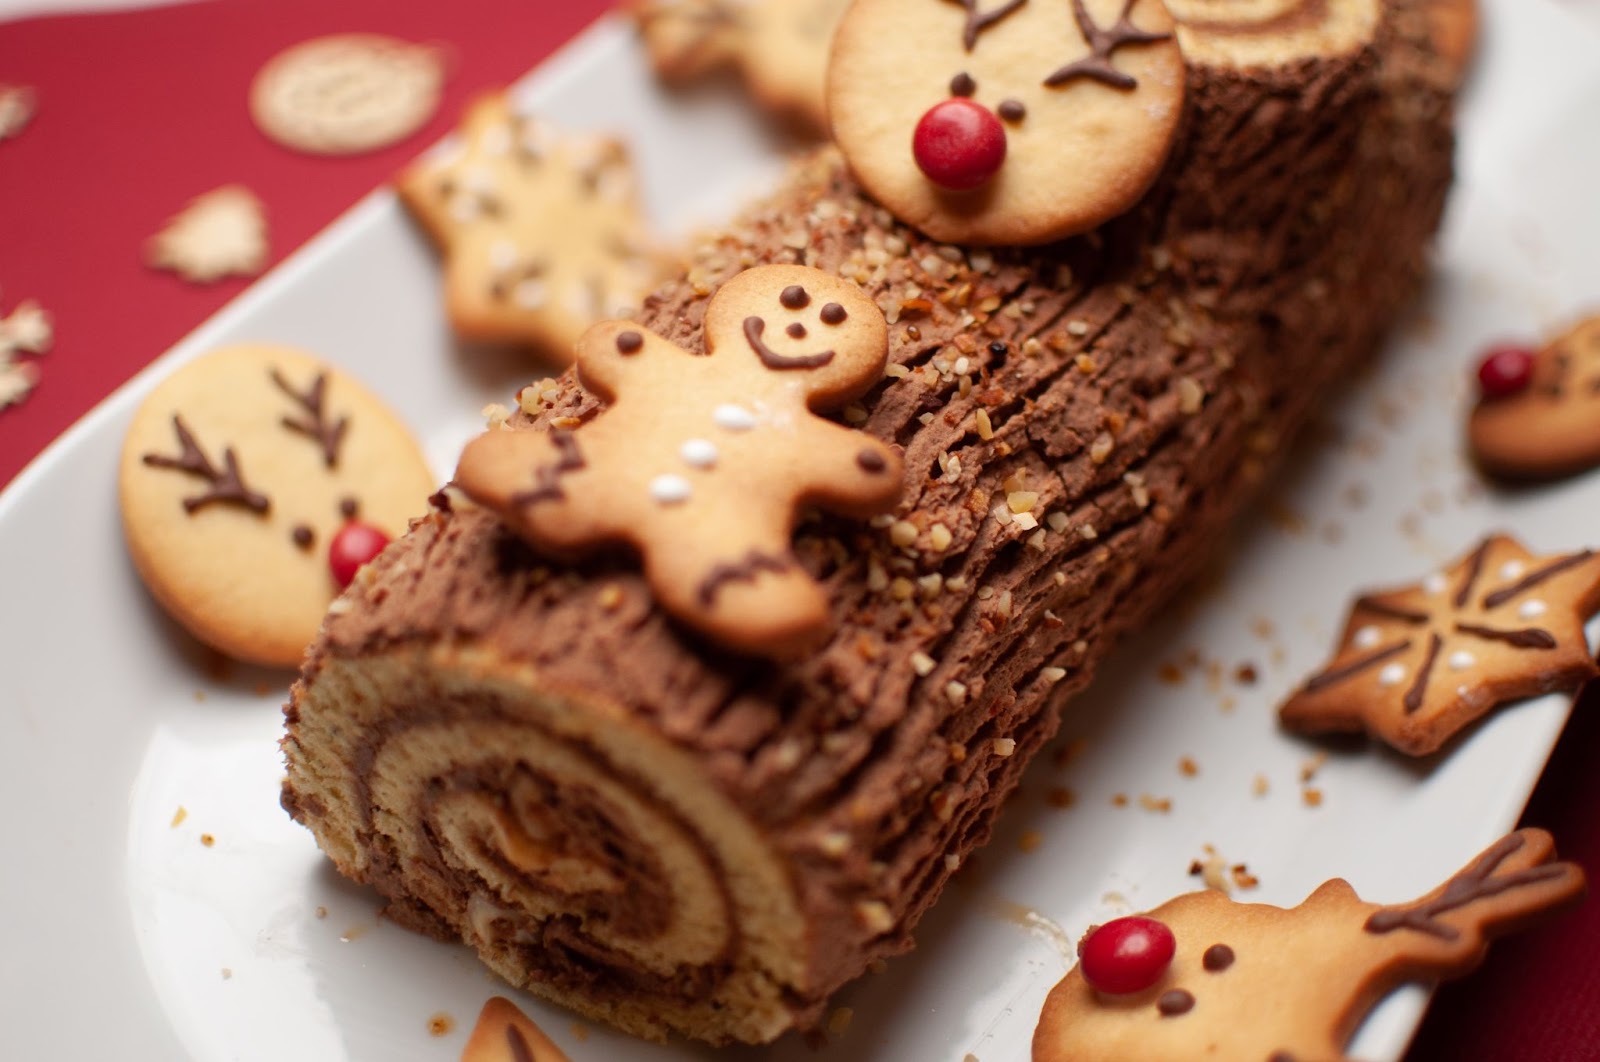 Coffee and Cake Visit - a great option for Christmas visits